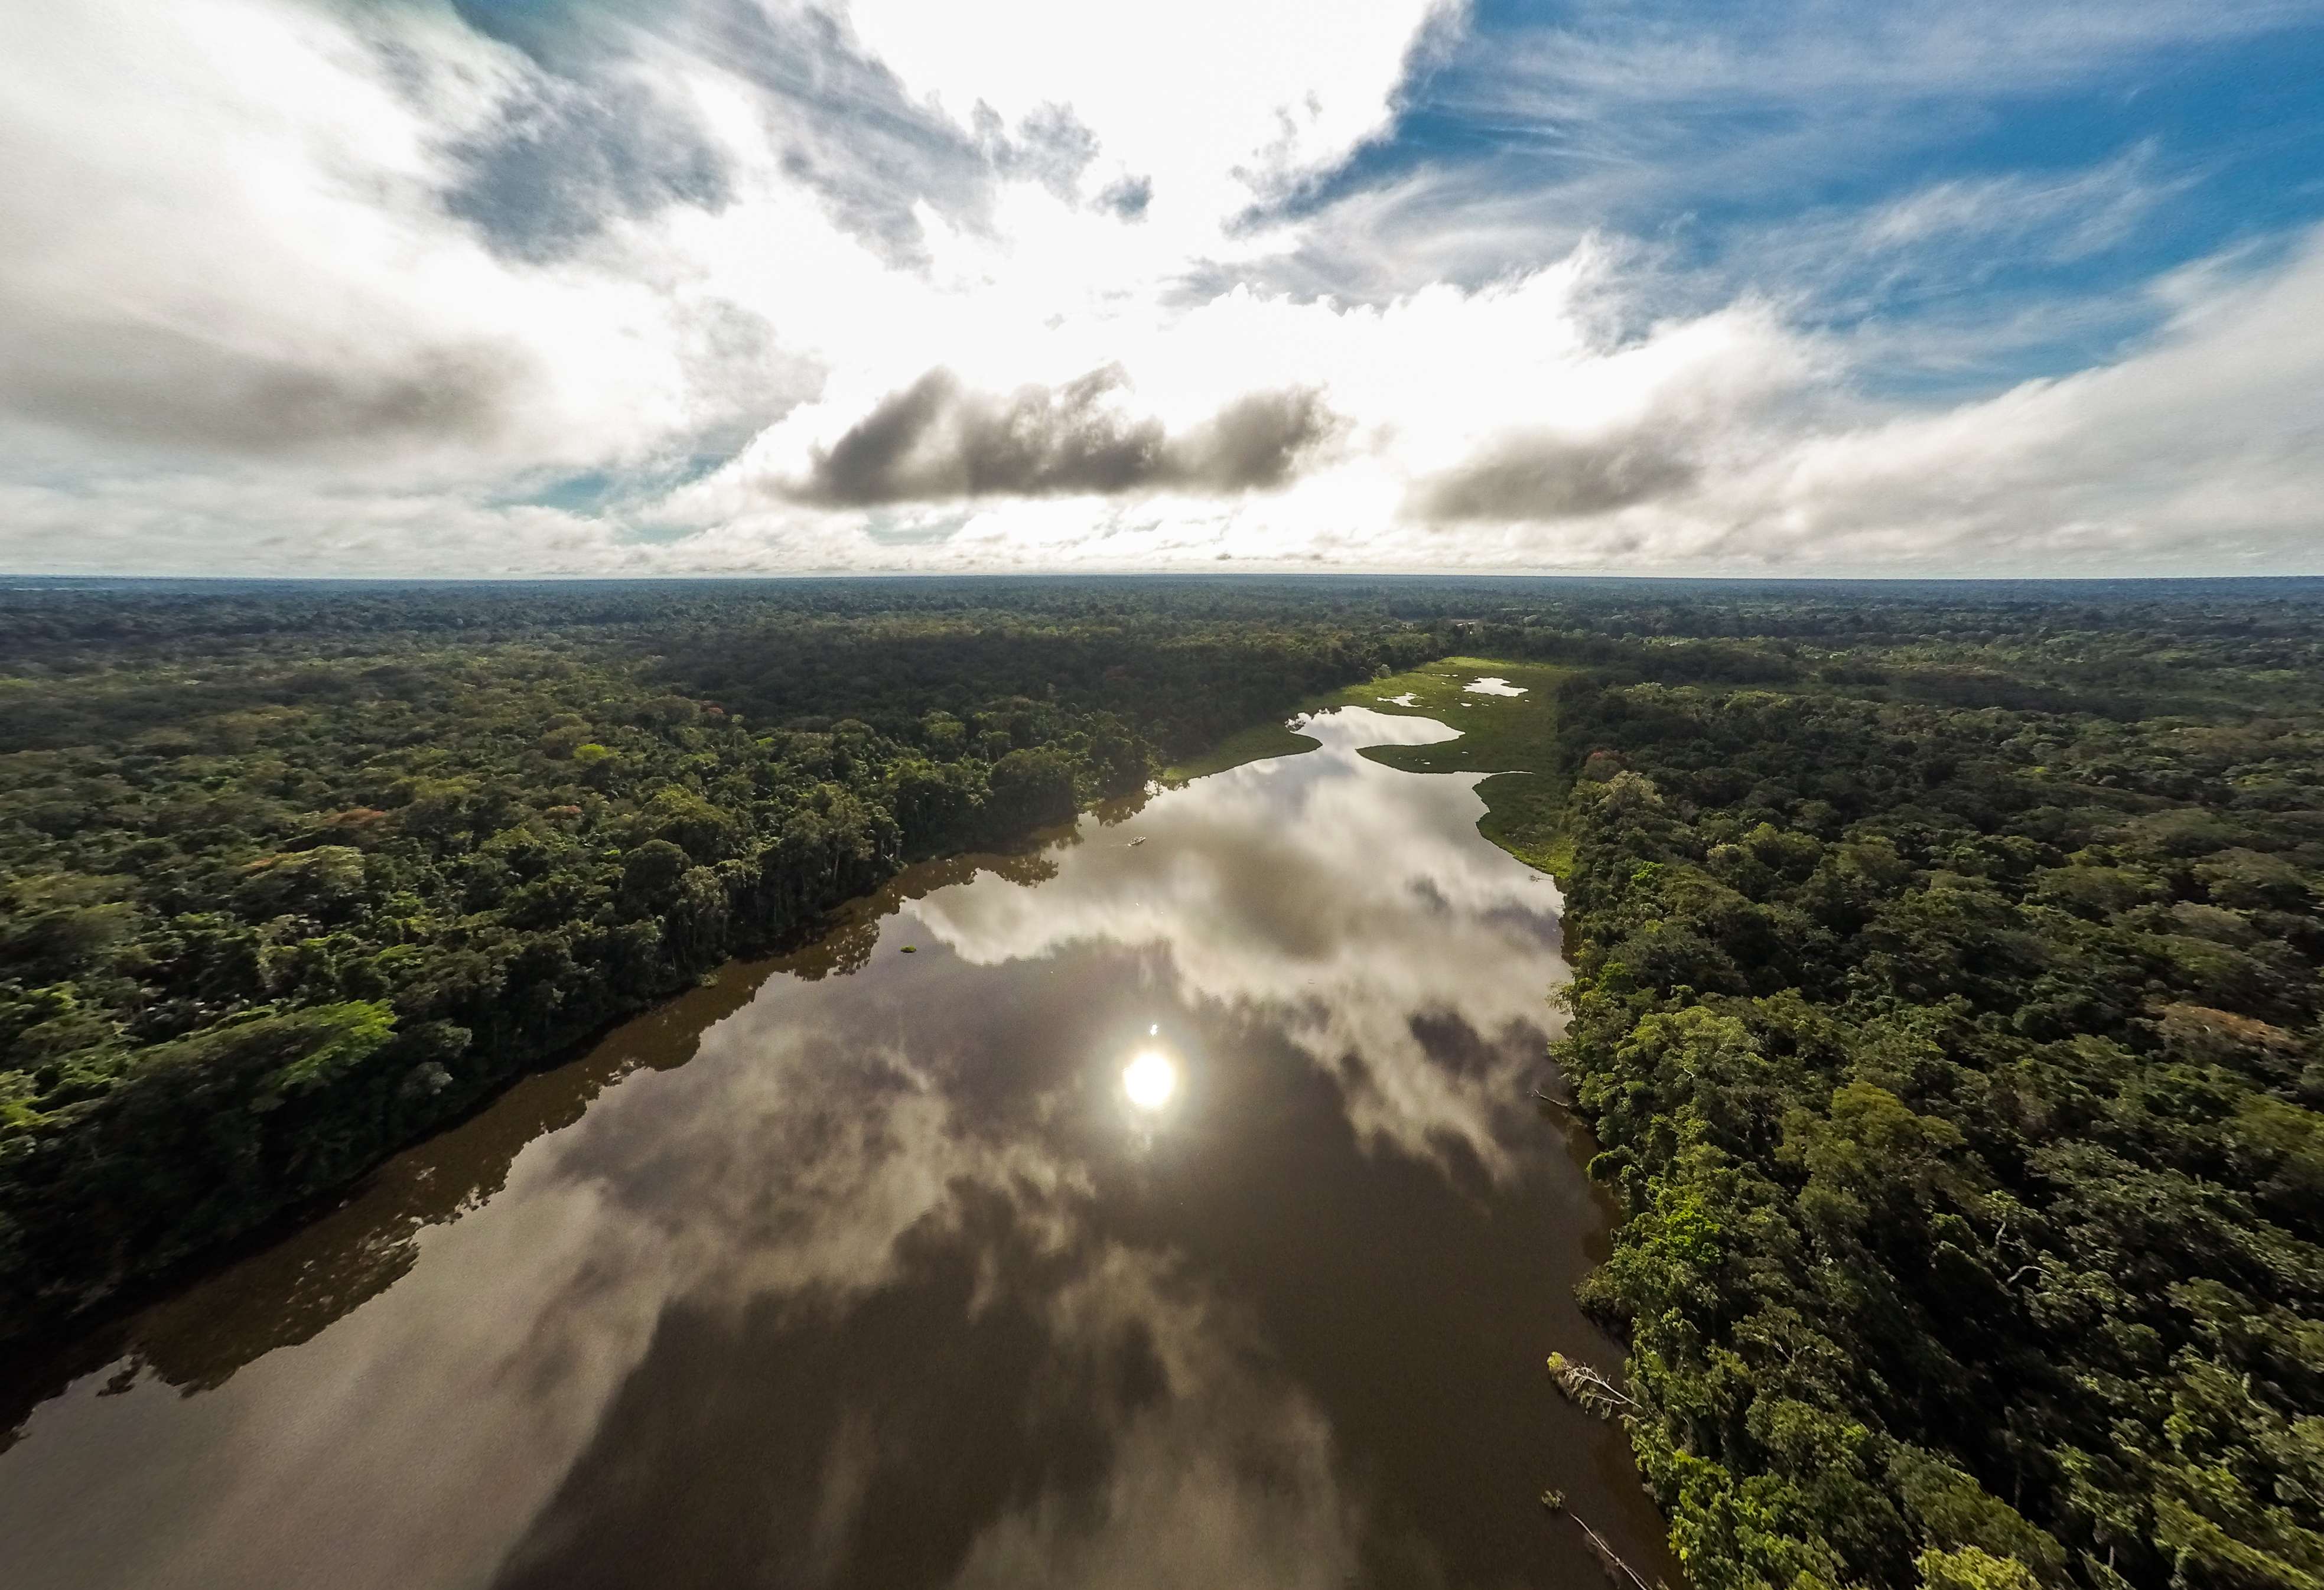 The Tambopata River is one of the longest and most-travelled rivers in Peru. Here, it cuts through Tambopata National Reserve, a protected area of dense mature forests, lakes, swamps and savannahs that can only be accessed by water. © Days Edge Productions/WWF-US